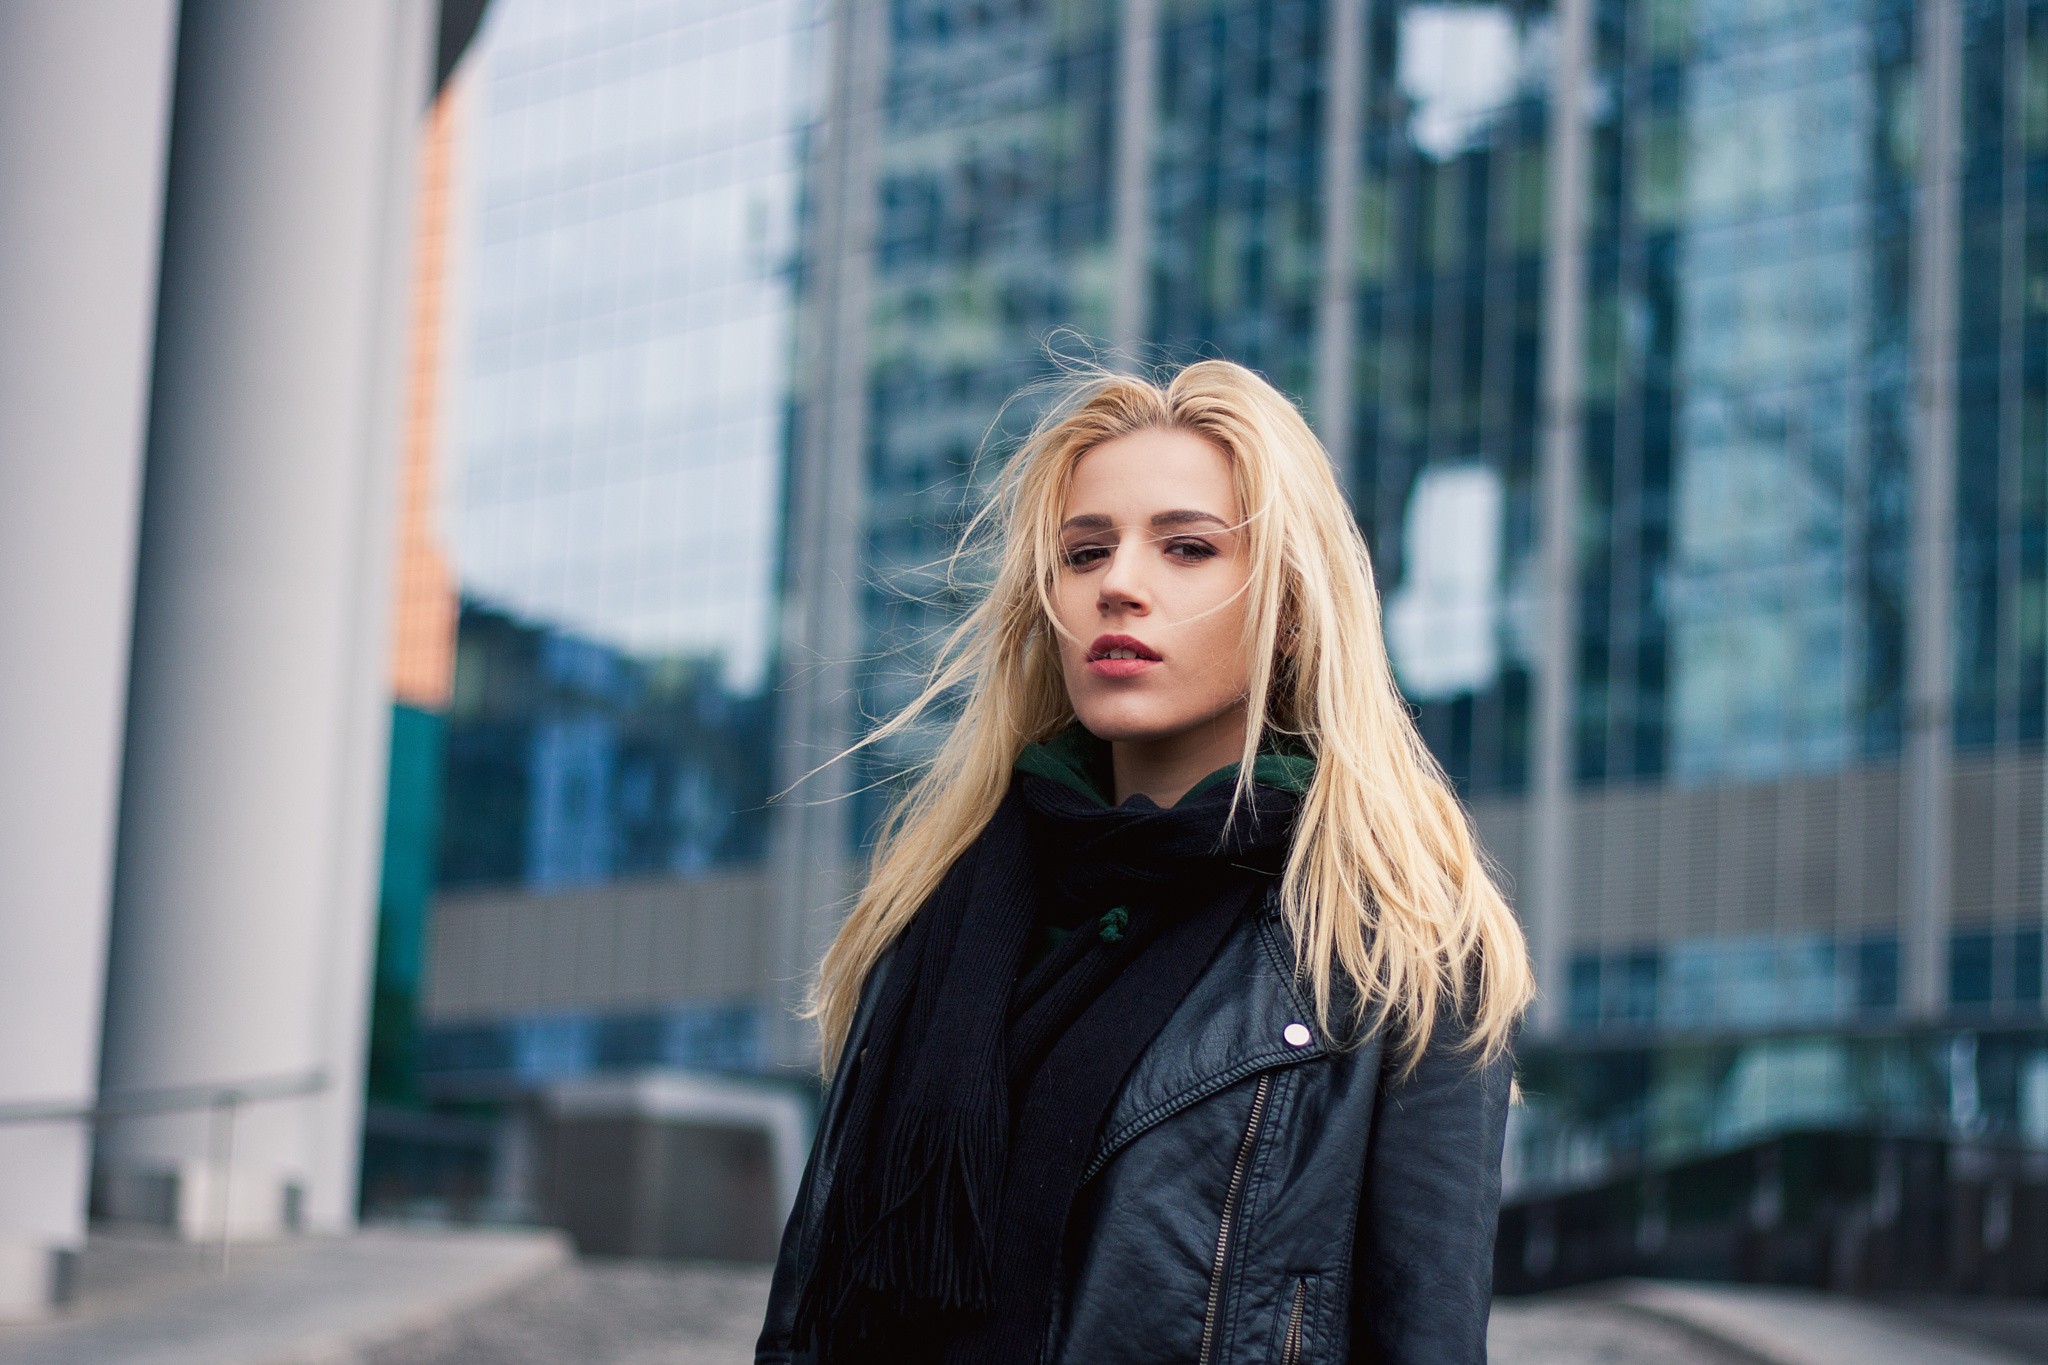 Women Blonde Windy Scarf Looking At Viewer Women Outdoors Leather Jackets Black Jackets Hair In Face 2048x1365